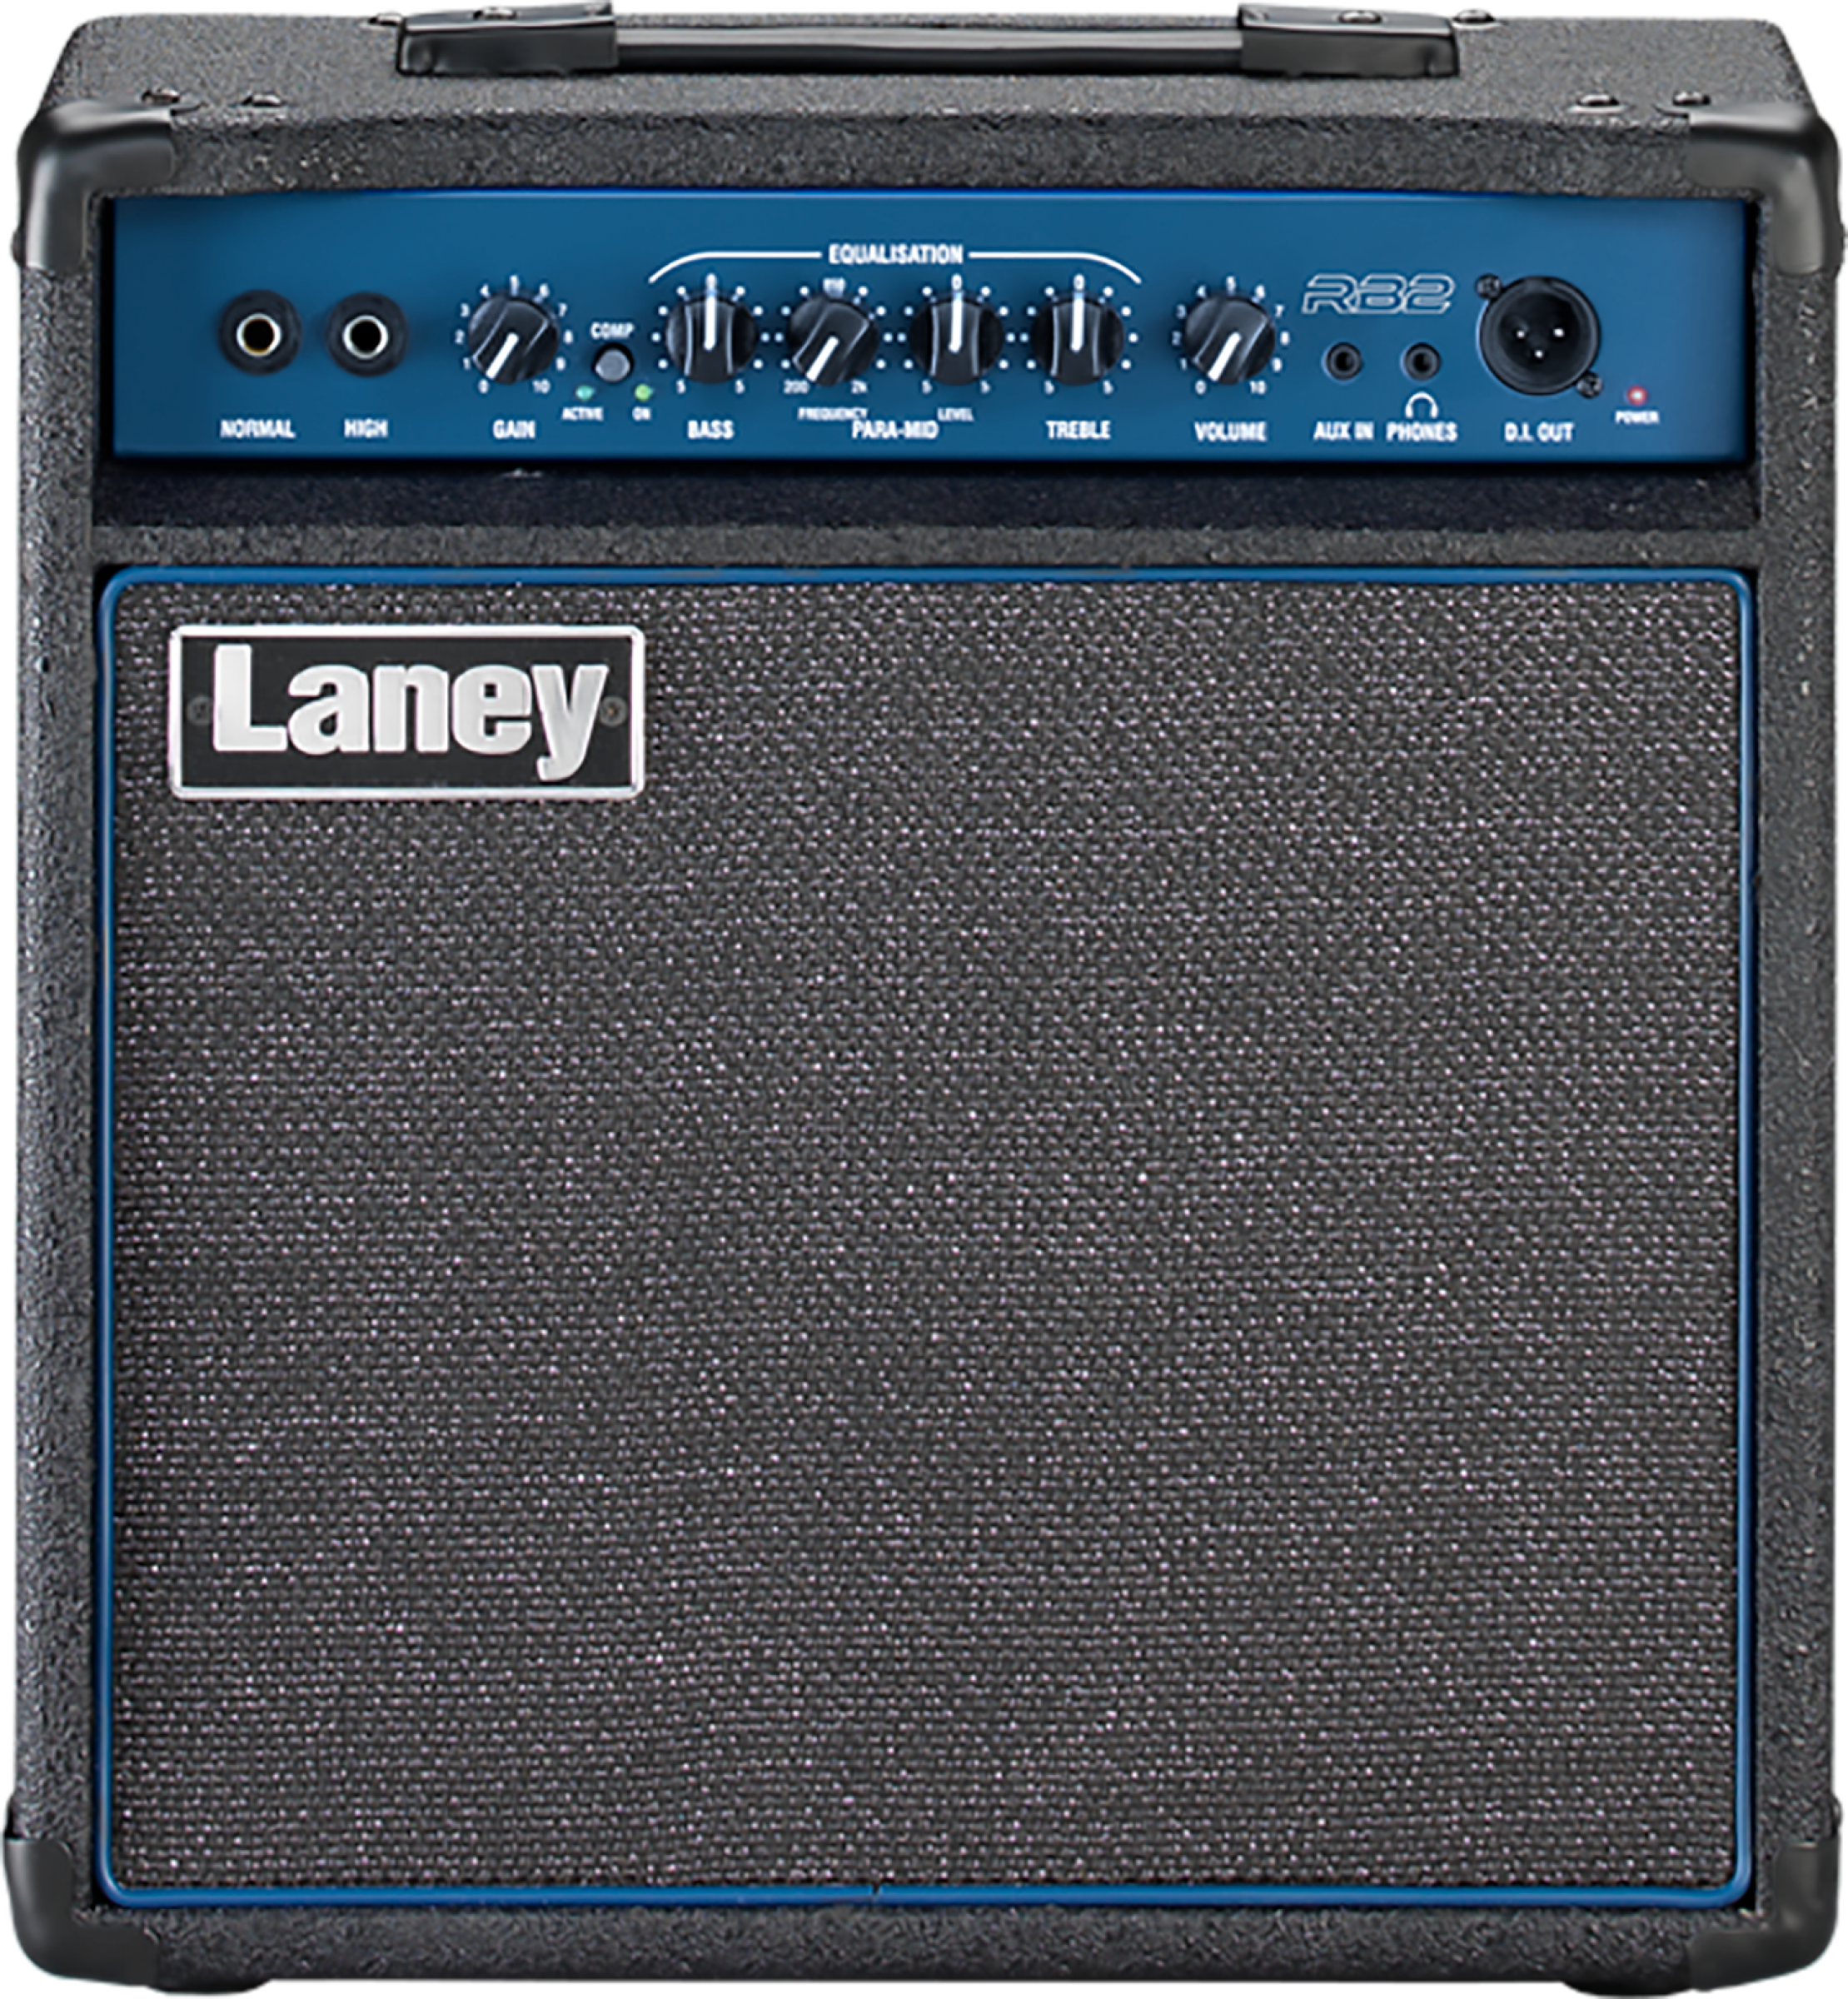 Laney Rb2 30w 1x10 - Bass combo amp - Main picture